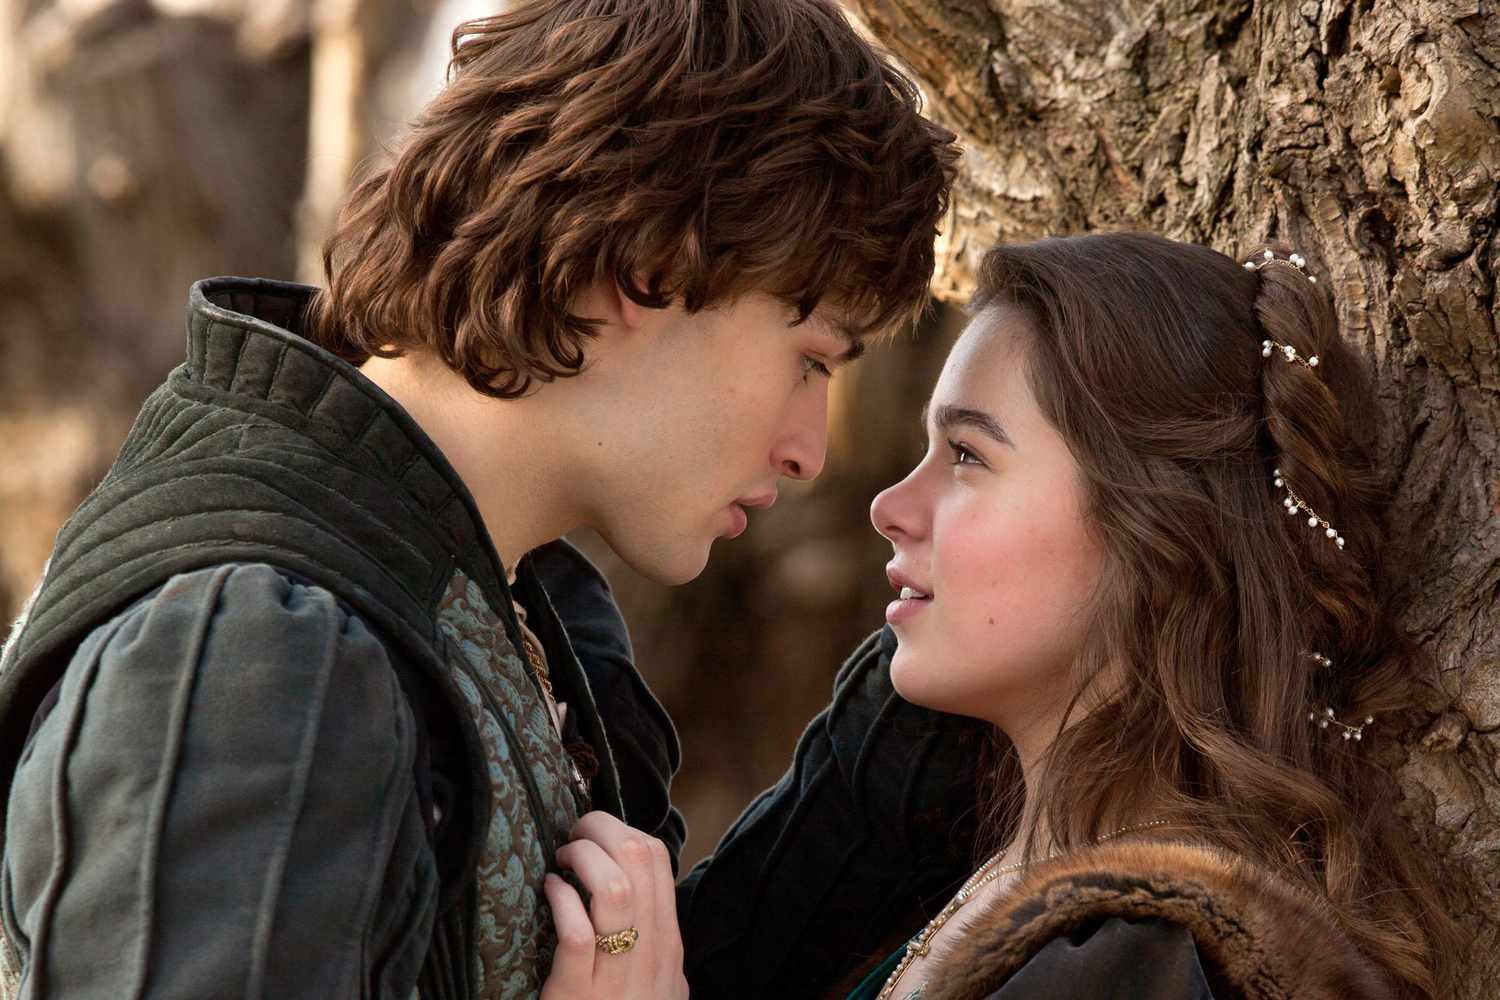 Romeo and Juliet (2013)Douglas Booth and Hailee Steinfeld